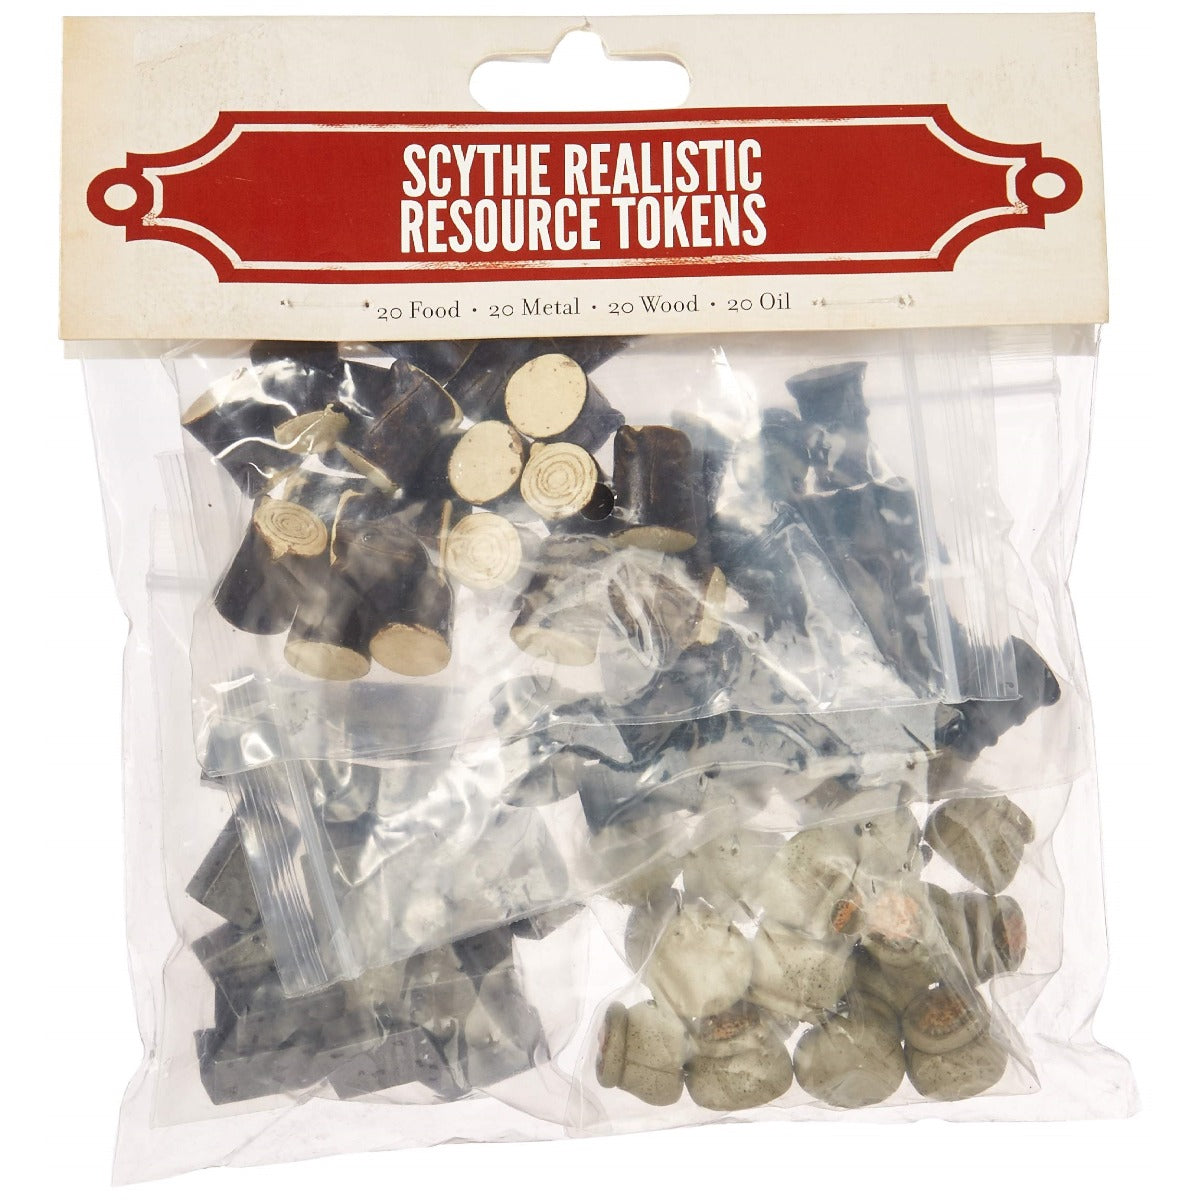 Scythe Realistic Resources